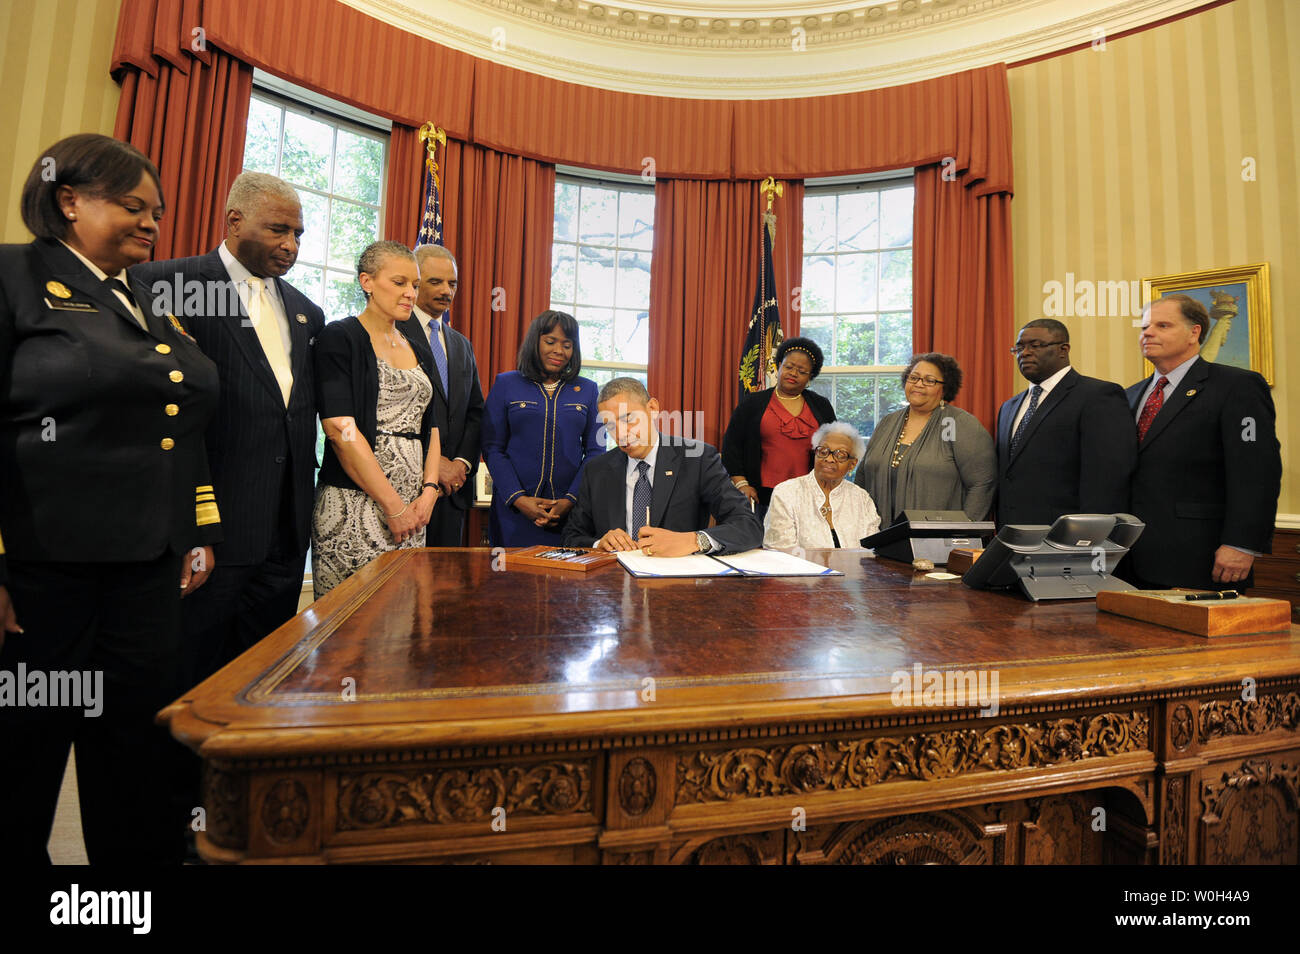 US President Barack Obama signs a bill in the Oval Office, May 24, 2013 in Washington, DC designating the Congressional Gold Medal commemorating the lives of the four young girls killed in the 16th Street Baptist Church Bombings of 1963 in Birmingham, Alabama. Witnessing (L-R) Surgeon General Regina Benjamin, Birmingham Mayor William Bell, Dr Sharon Malone Holder, Attorney General Eric Holder, Rep Terri Sewell (D-AL), Thelma Pippen McNair (mother of Denise McNair), Lisa McNair (sister of Denise McNair), Dianne Braddock (sister of Carolel Robertson), Rev Arthur Price, Jr (pastor 16th Street Bap Stock Photo